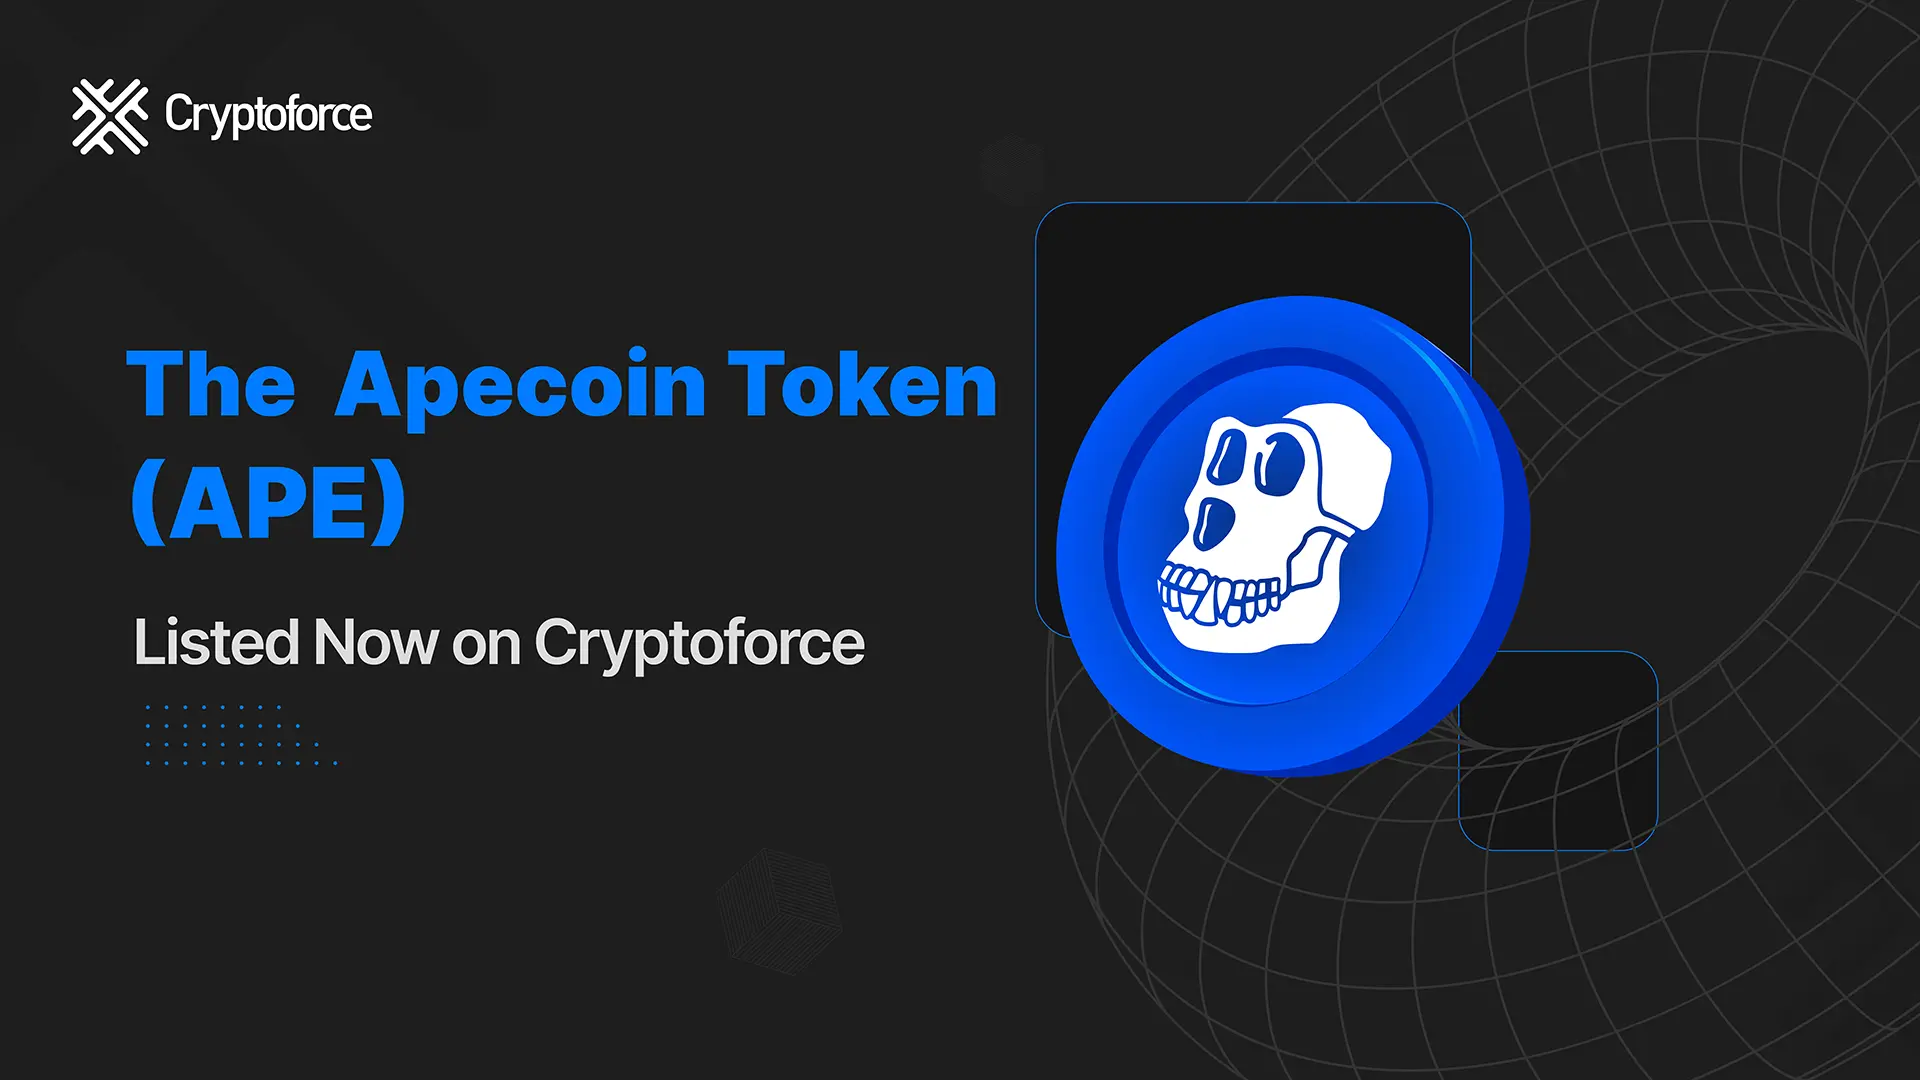 What is Apecoin?